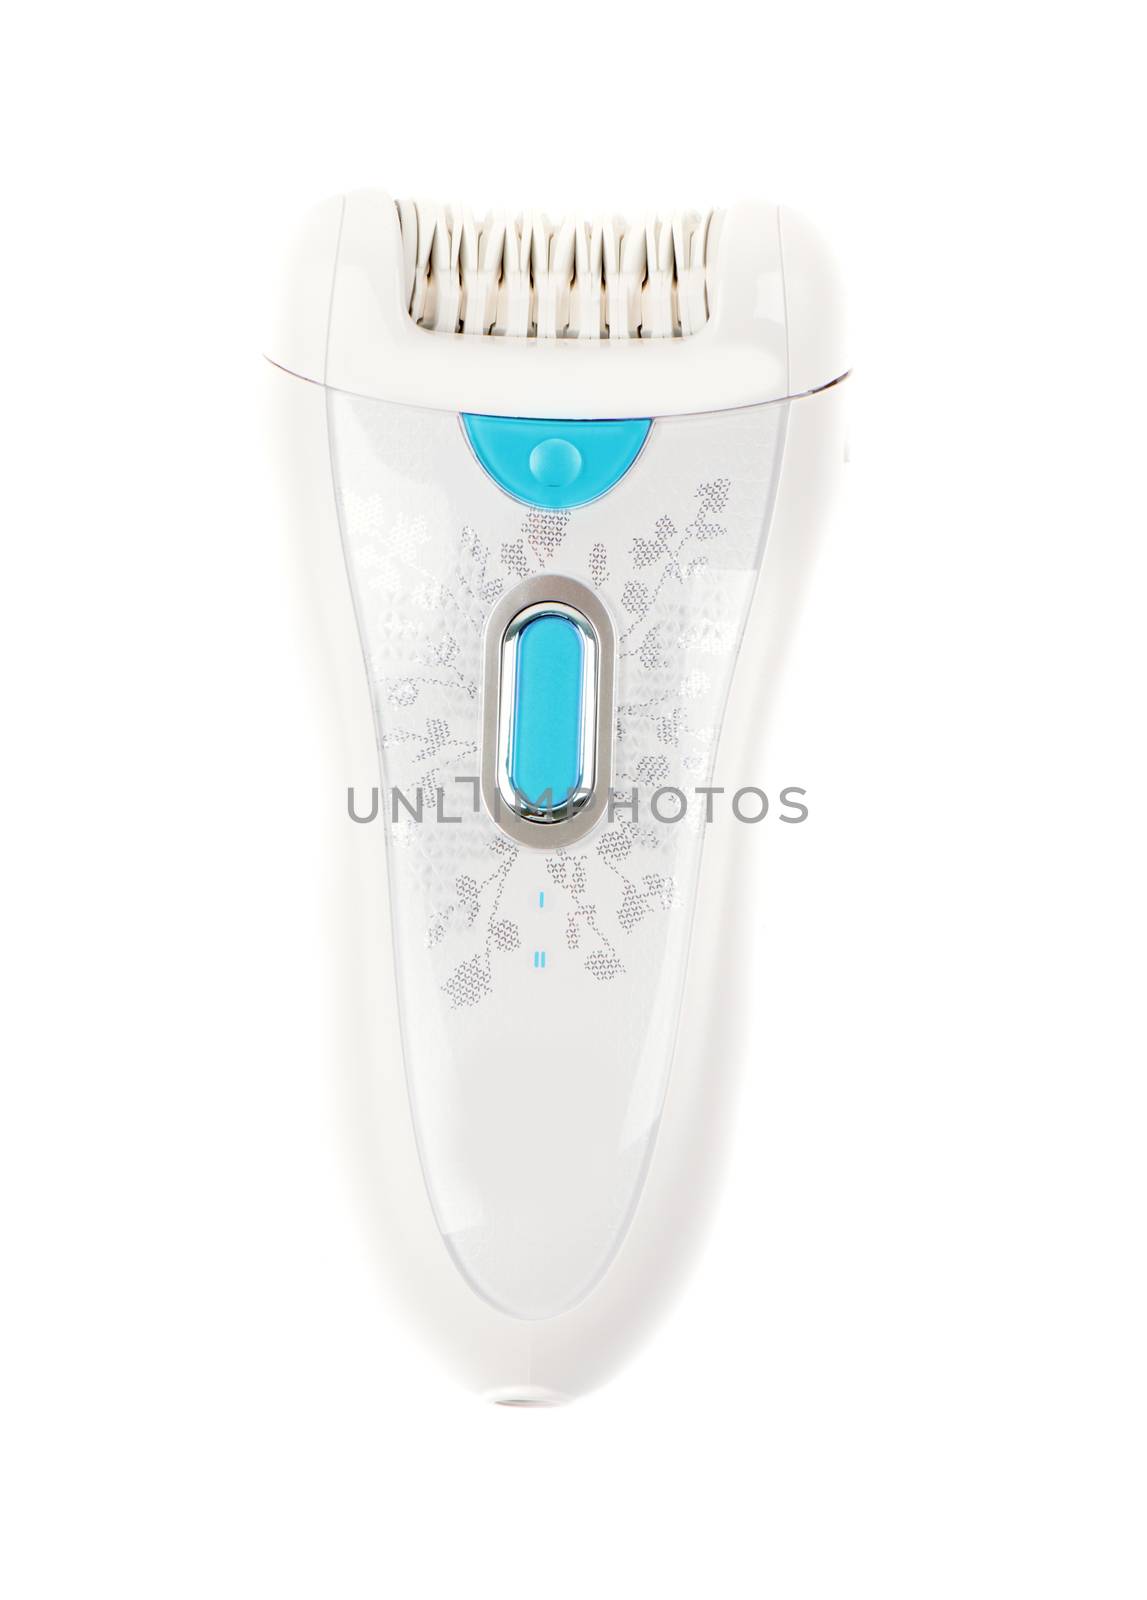 Ladies electric hair remover shaver depilator on white. Beauty and skin body care concept